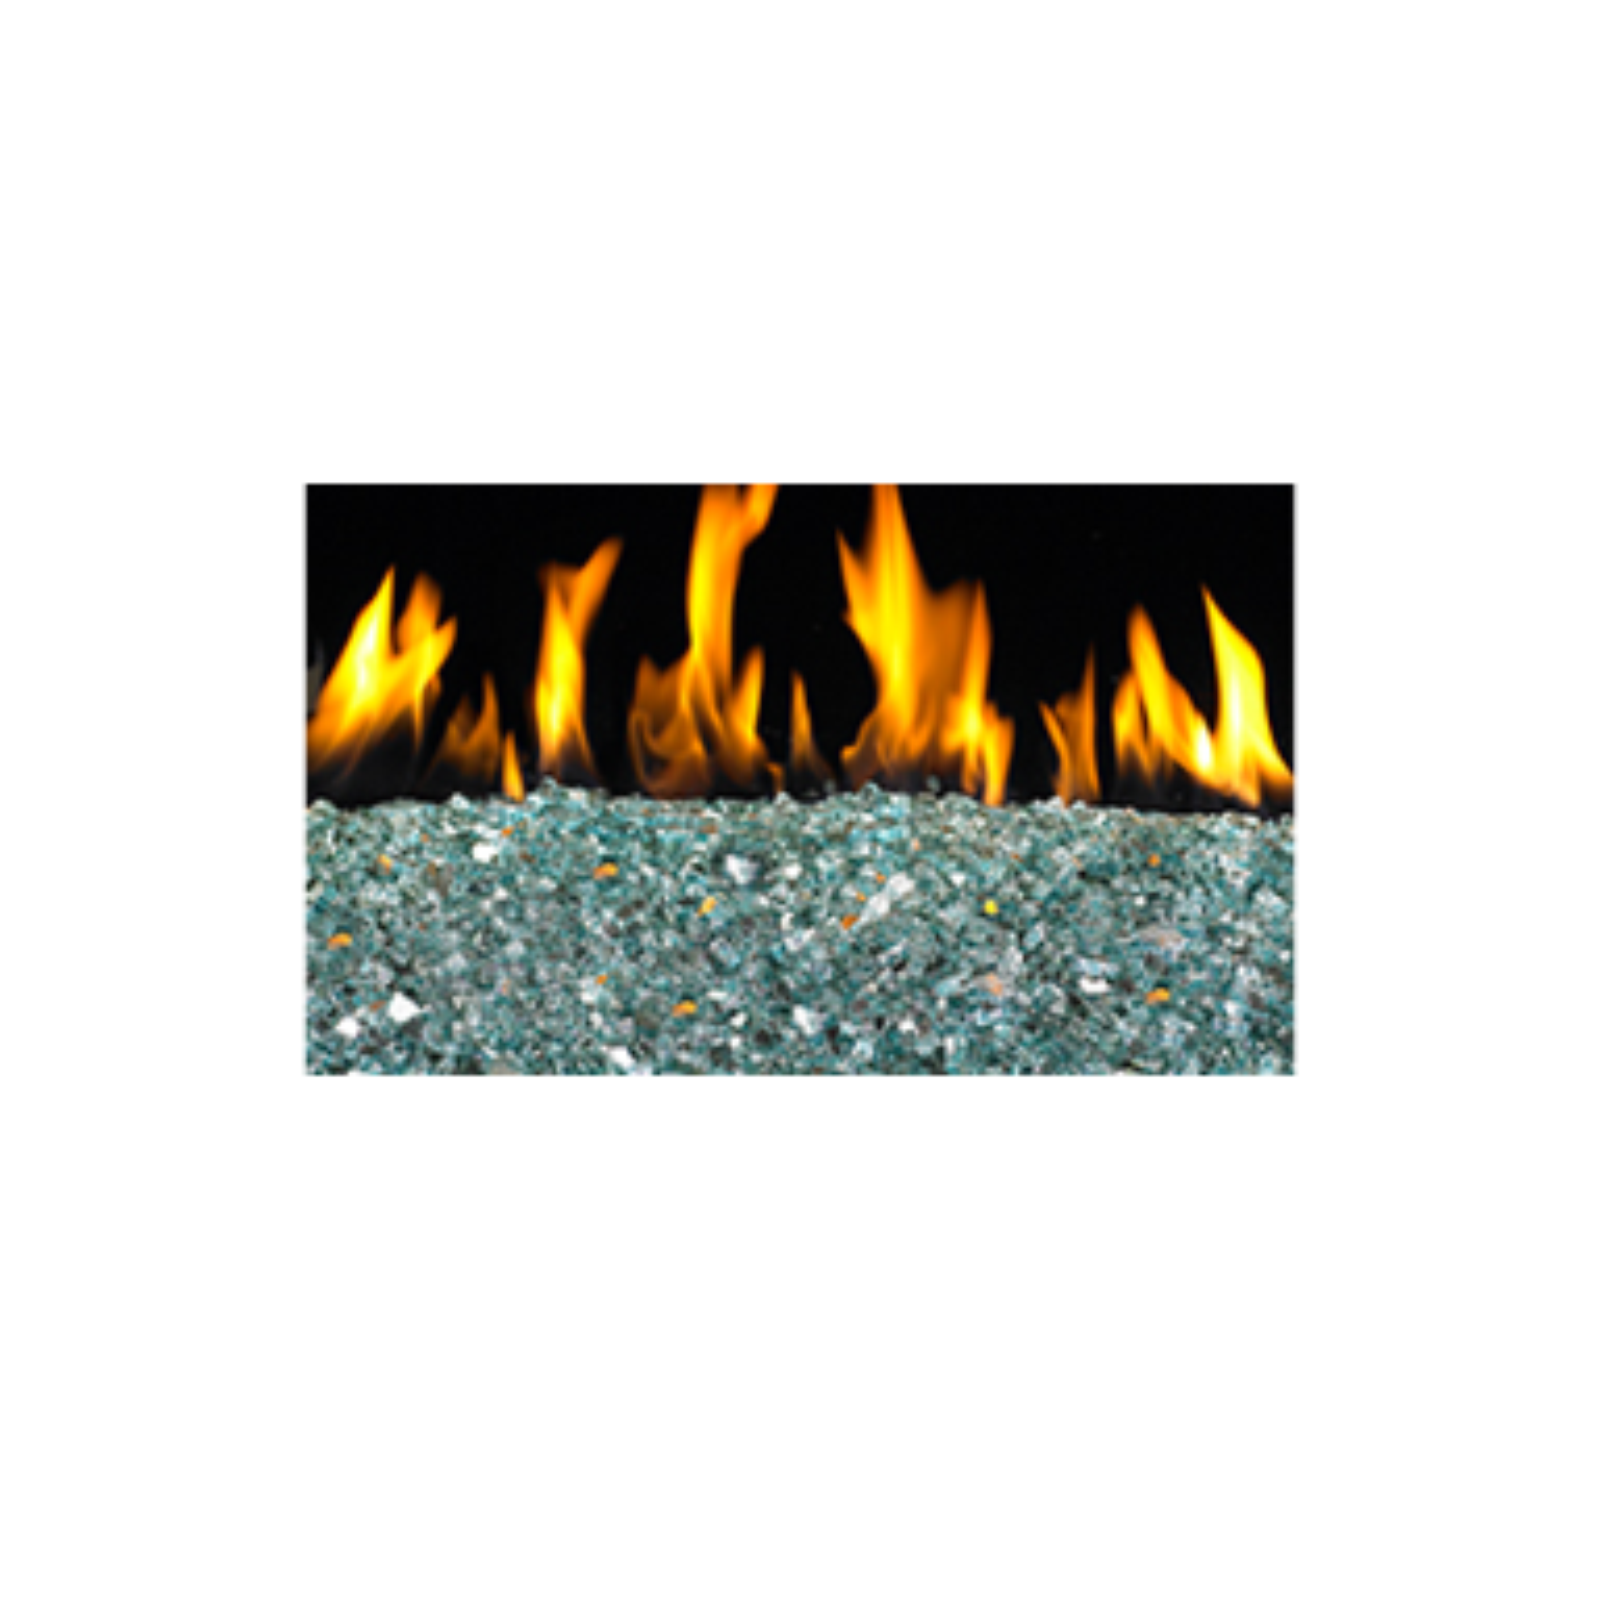 Realfyre Azuria Reflective‚ 1/4 Inch  Crushed Fire Glass 10 lbs - GL10FR